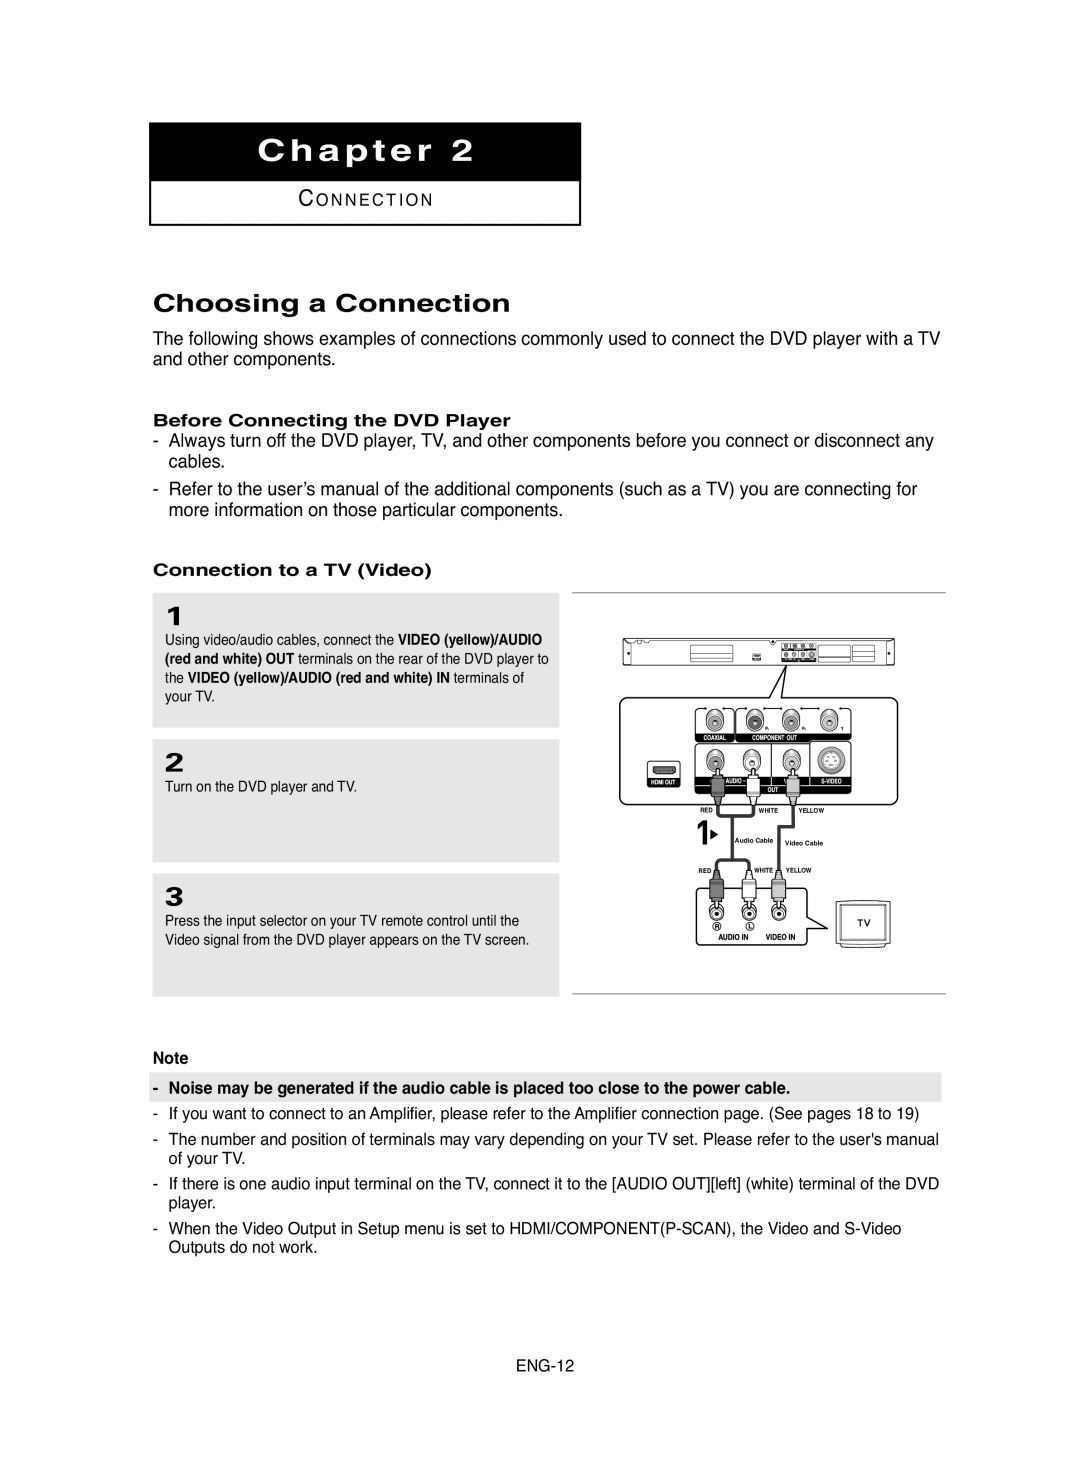 Samsung DVD-HD755 manual Choosing a Connection, Chapter, Before Connecting the DVD Player, Connection to a TV Video 